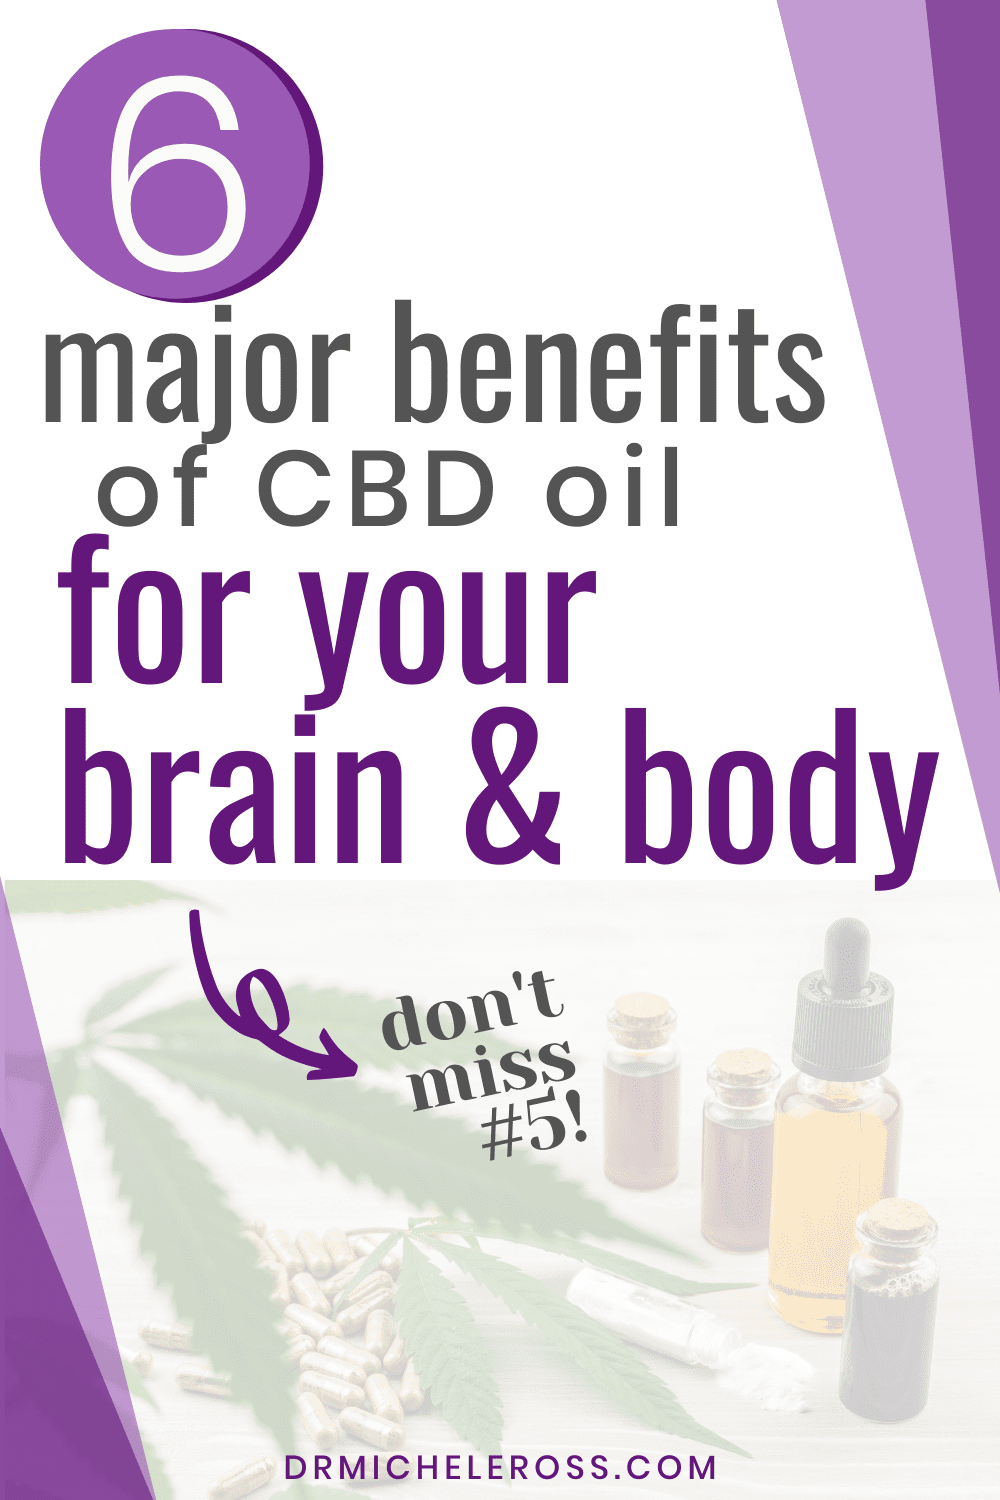 hemp oil can reduce pain and inflammation